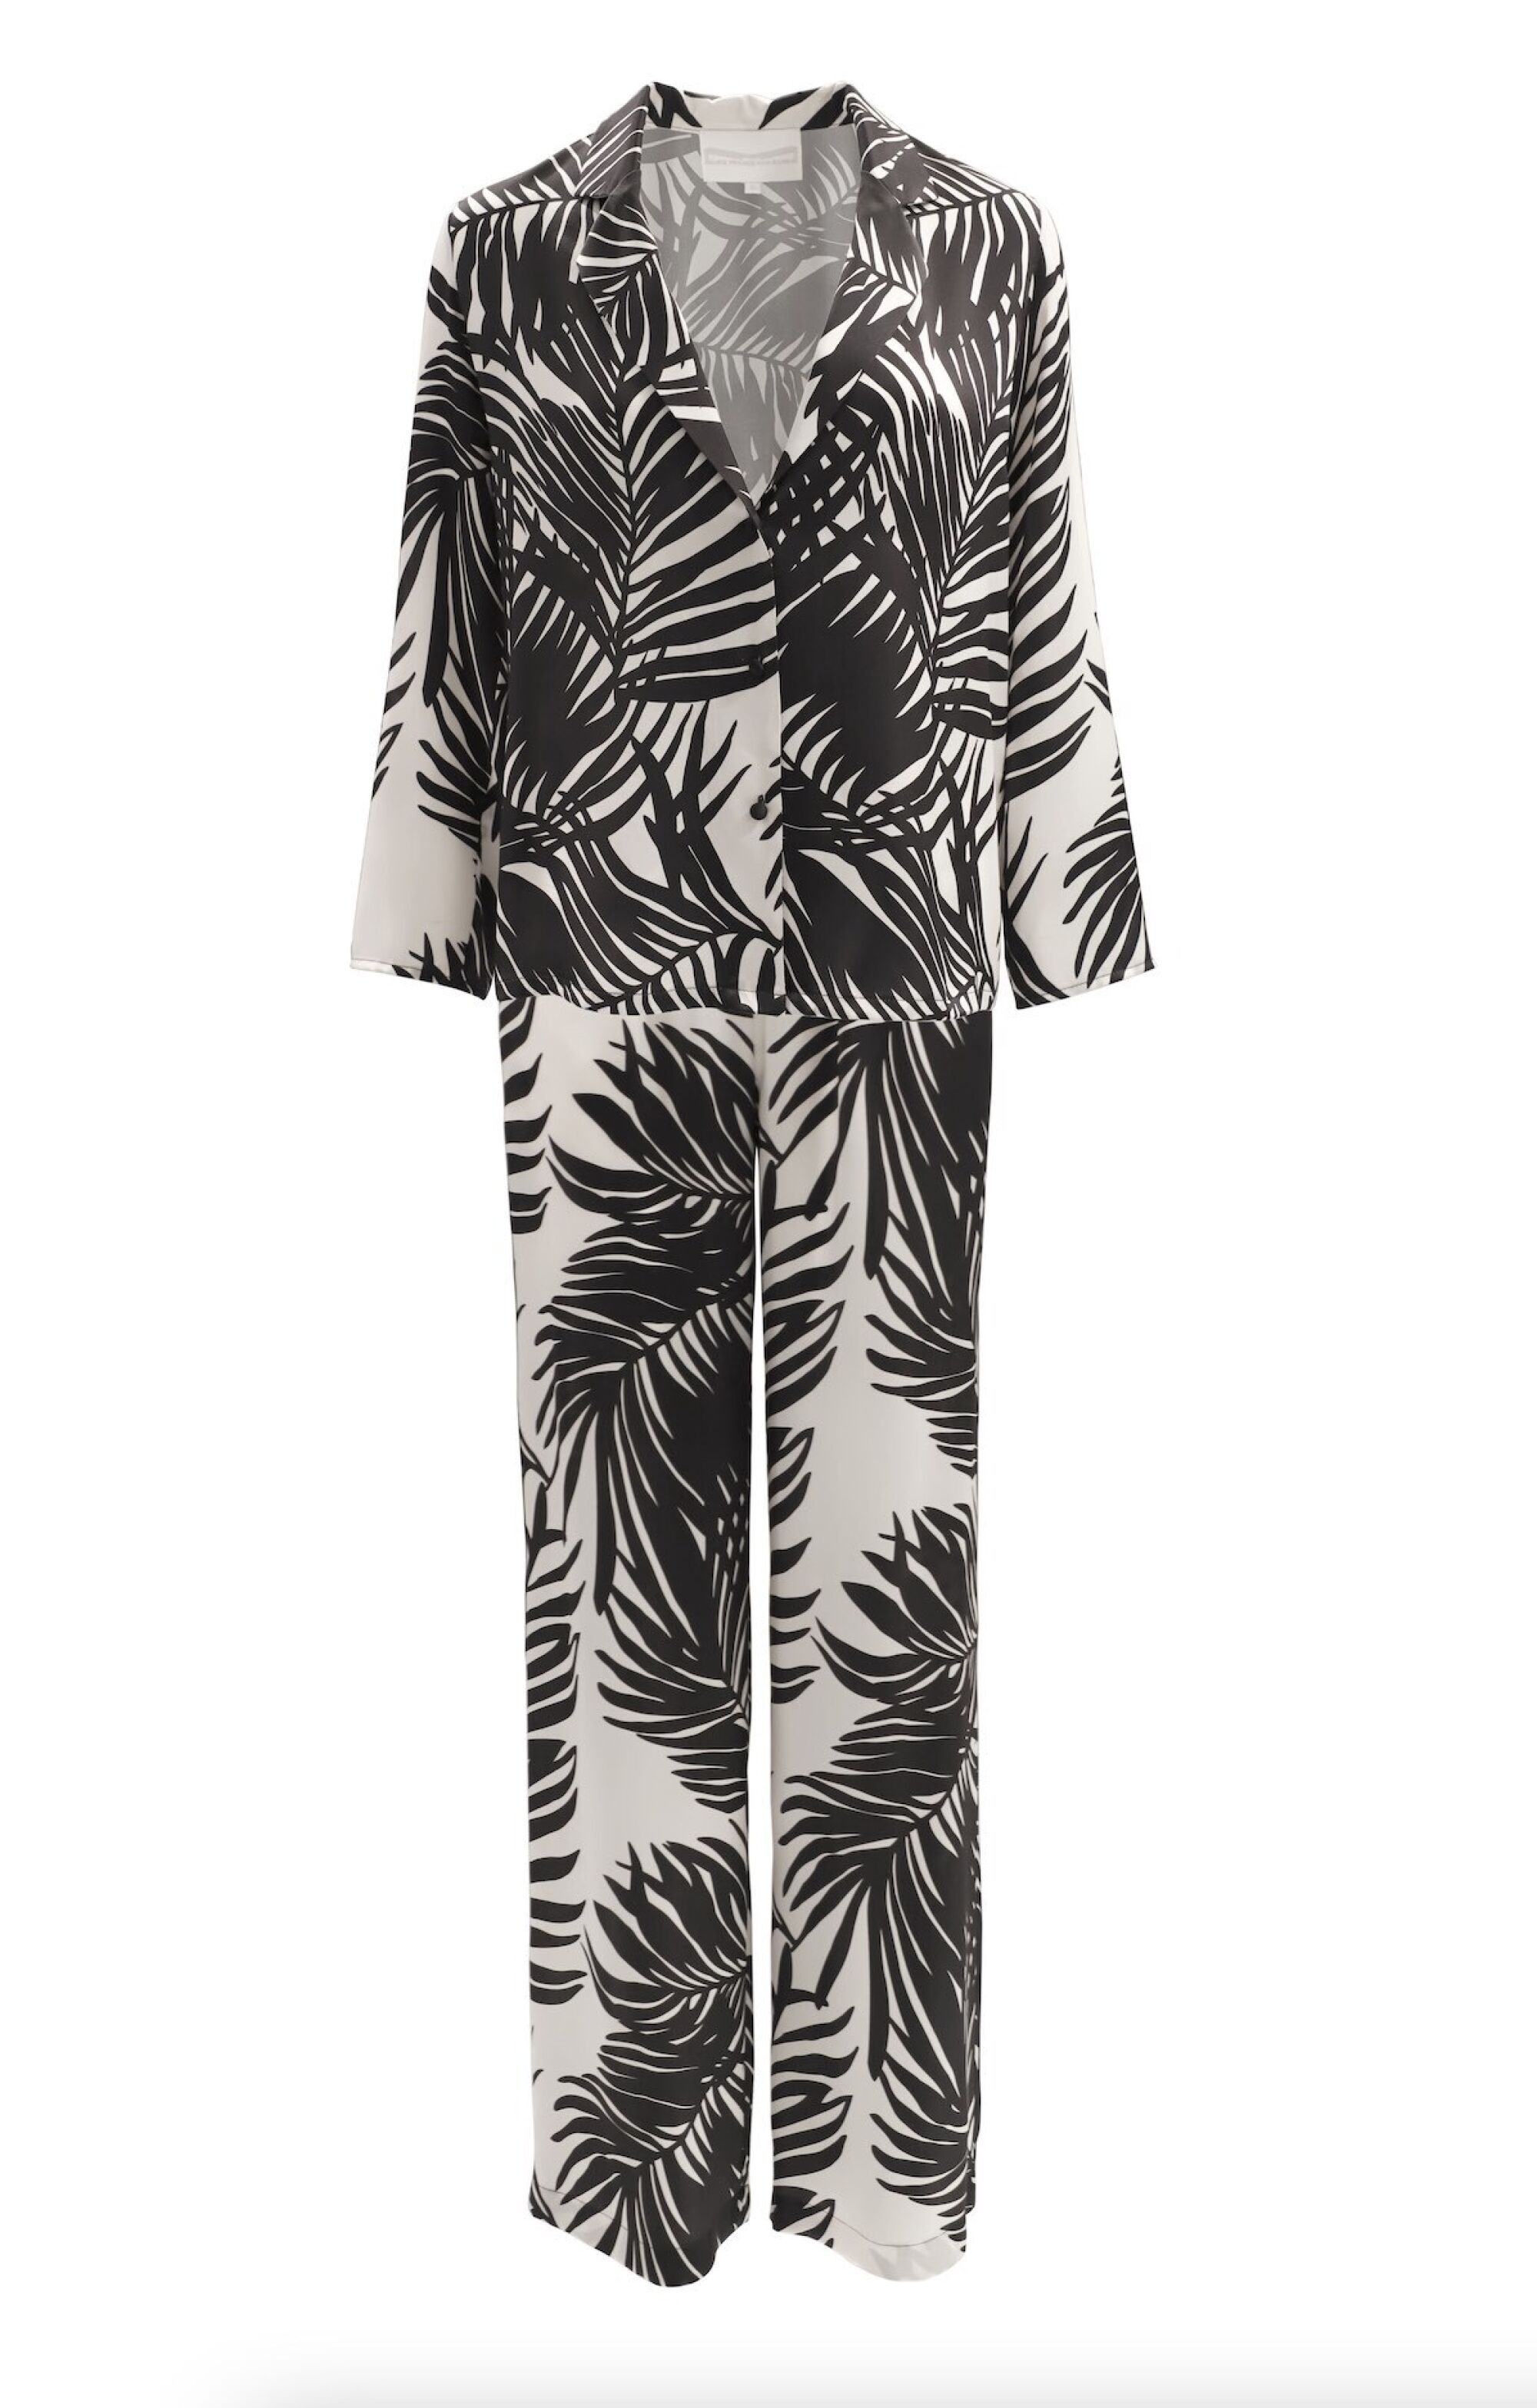 Loungewear set with a black palm frond design